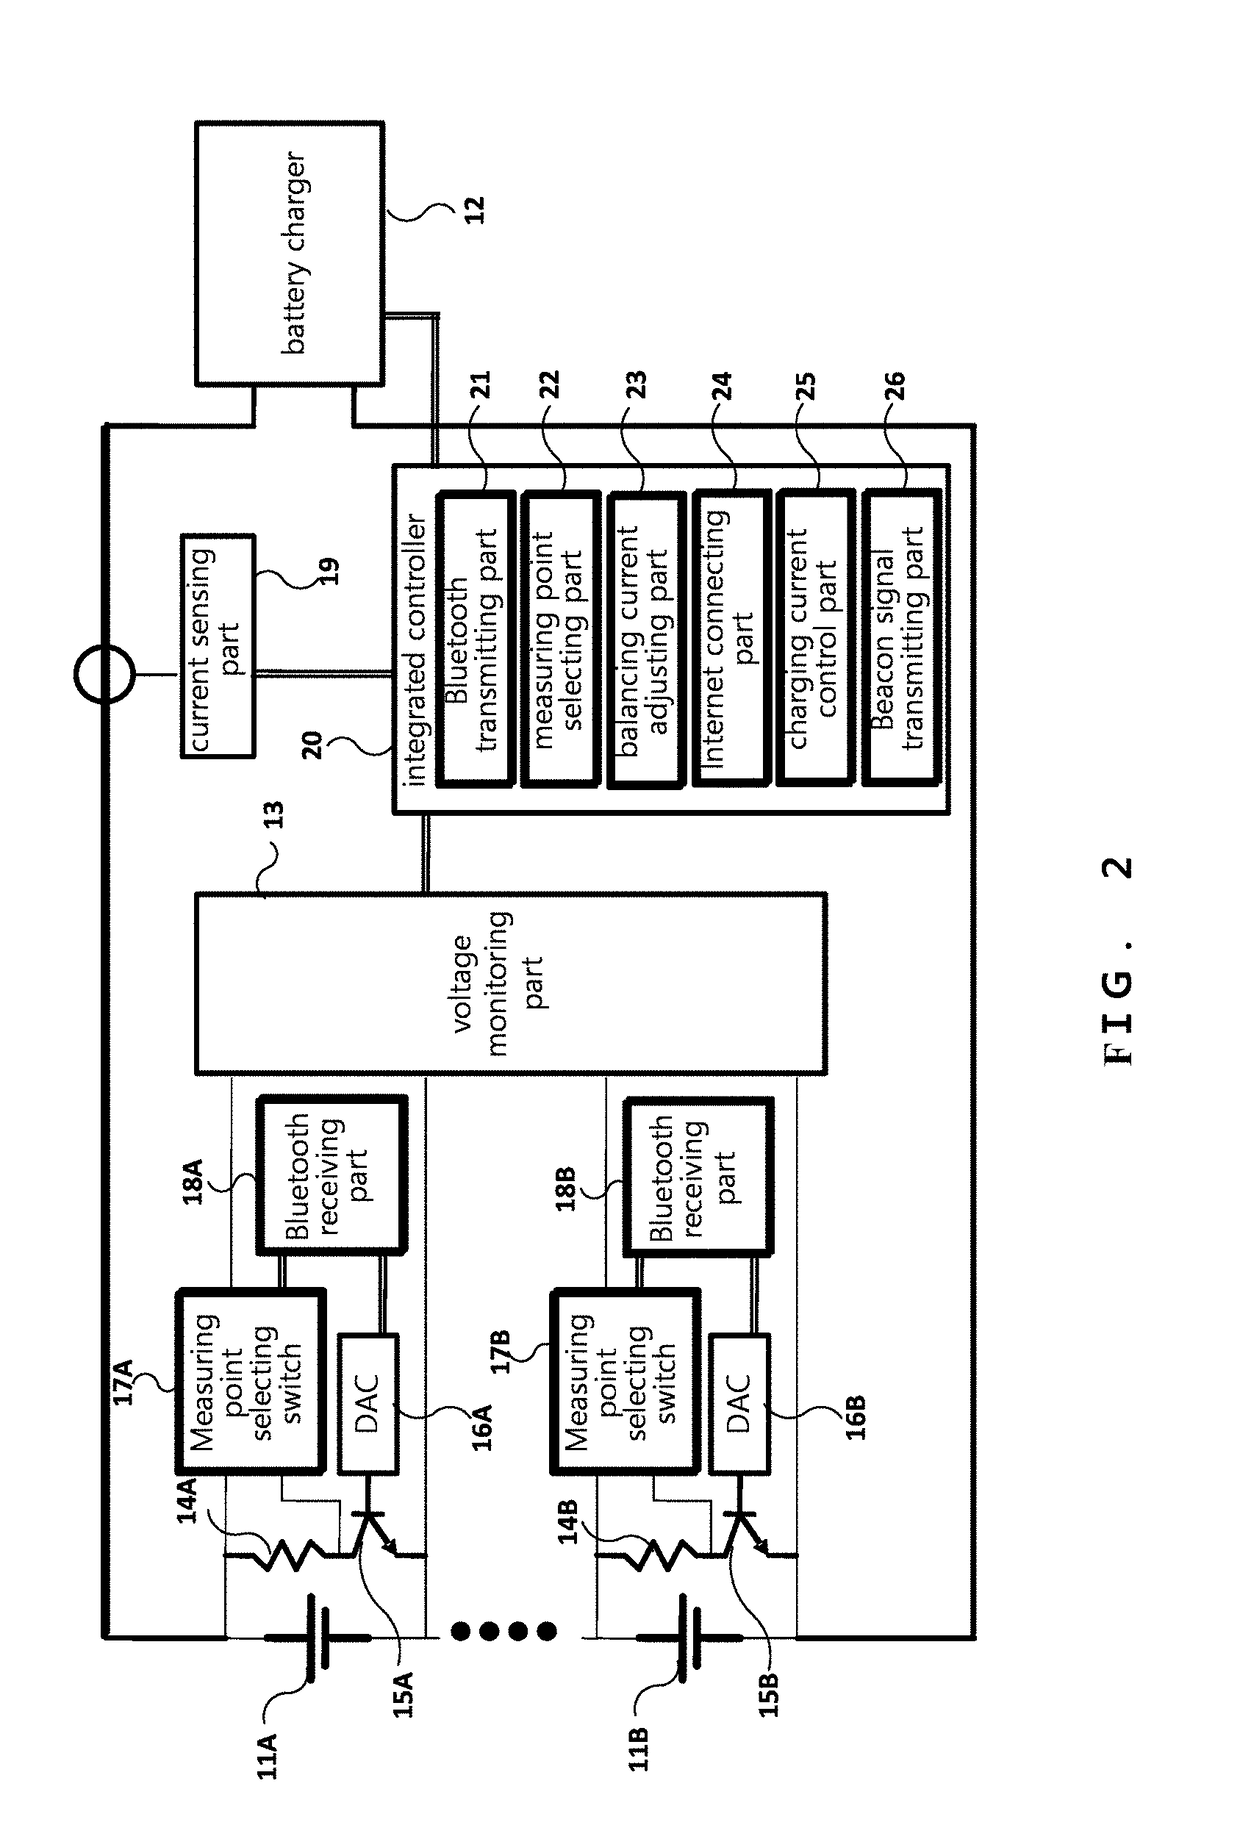 Device for uniformly charging battery pack by variably adjusting balancing current using internet of things based on bluetooth